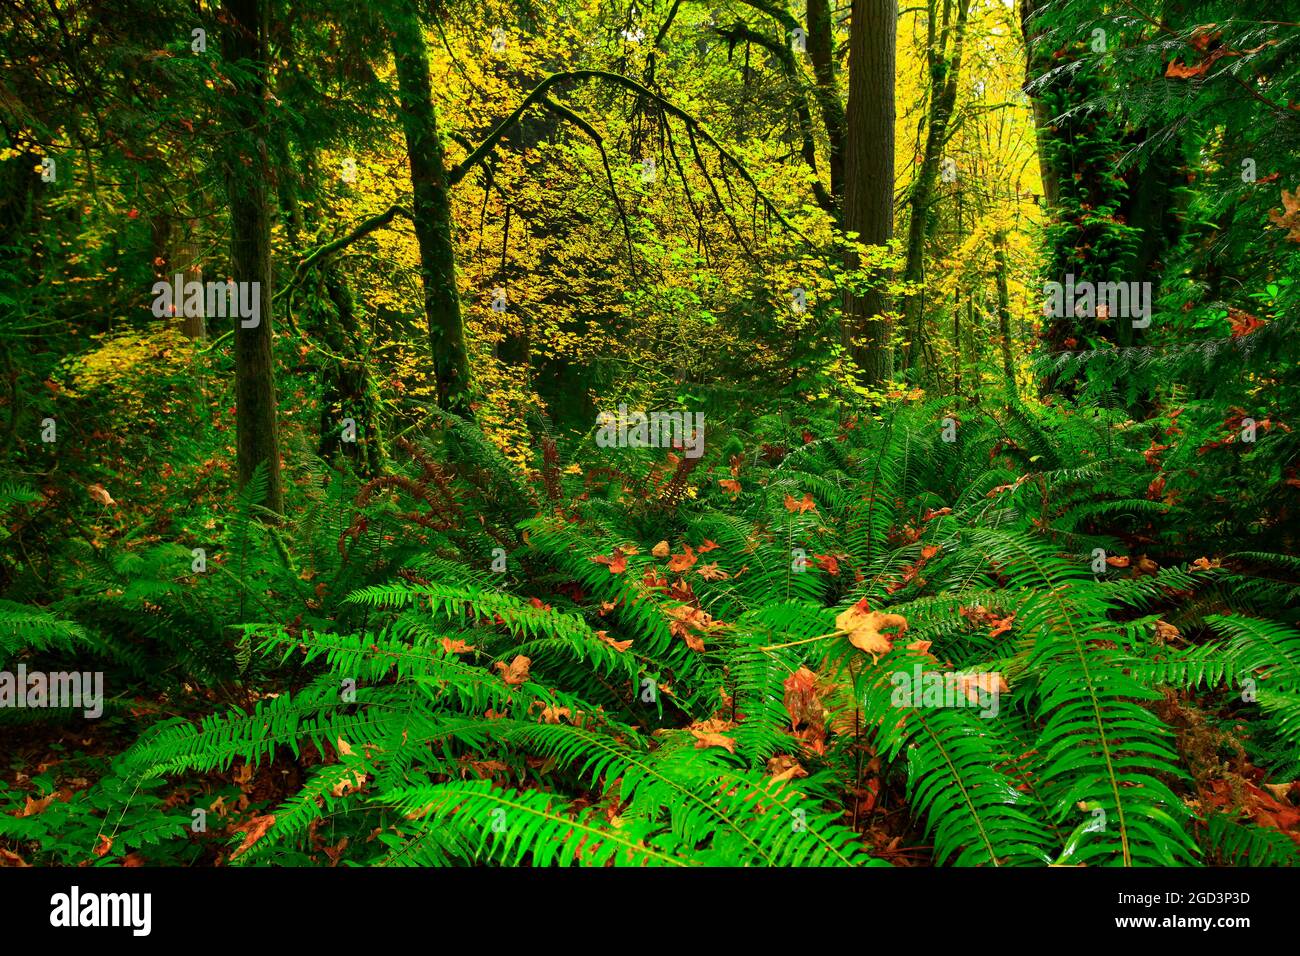 a exterior picture of an Pacific Northwest rainforest with Sword ferns Stock Photo